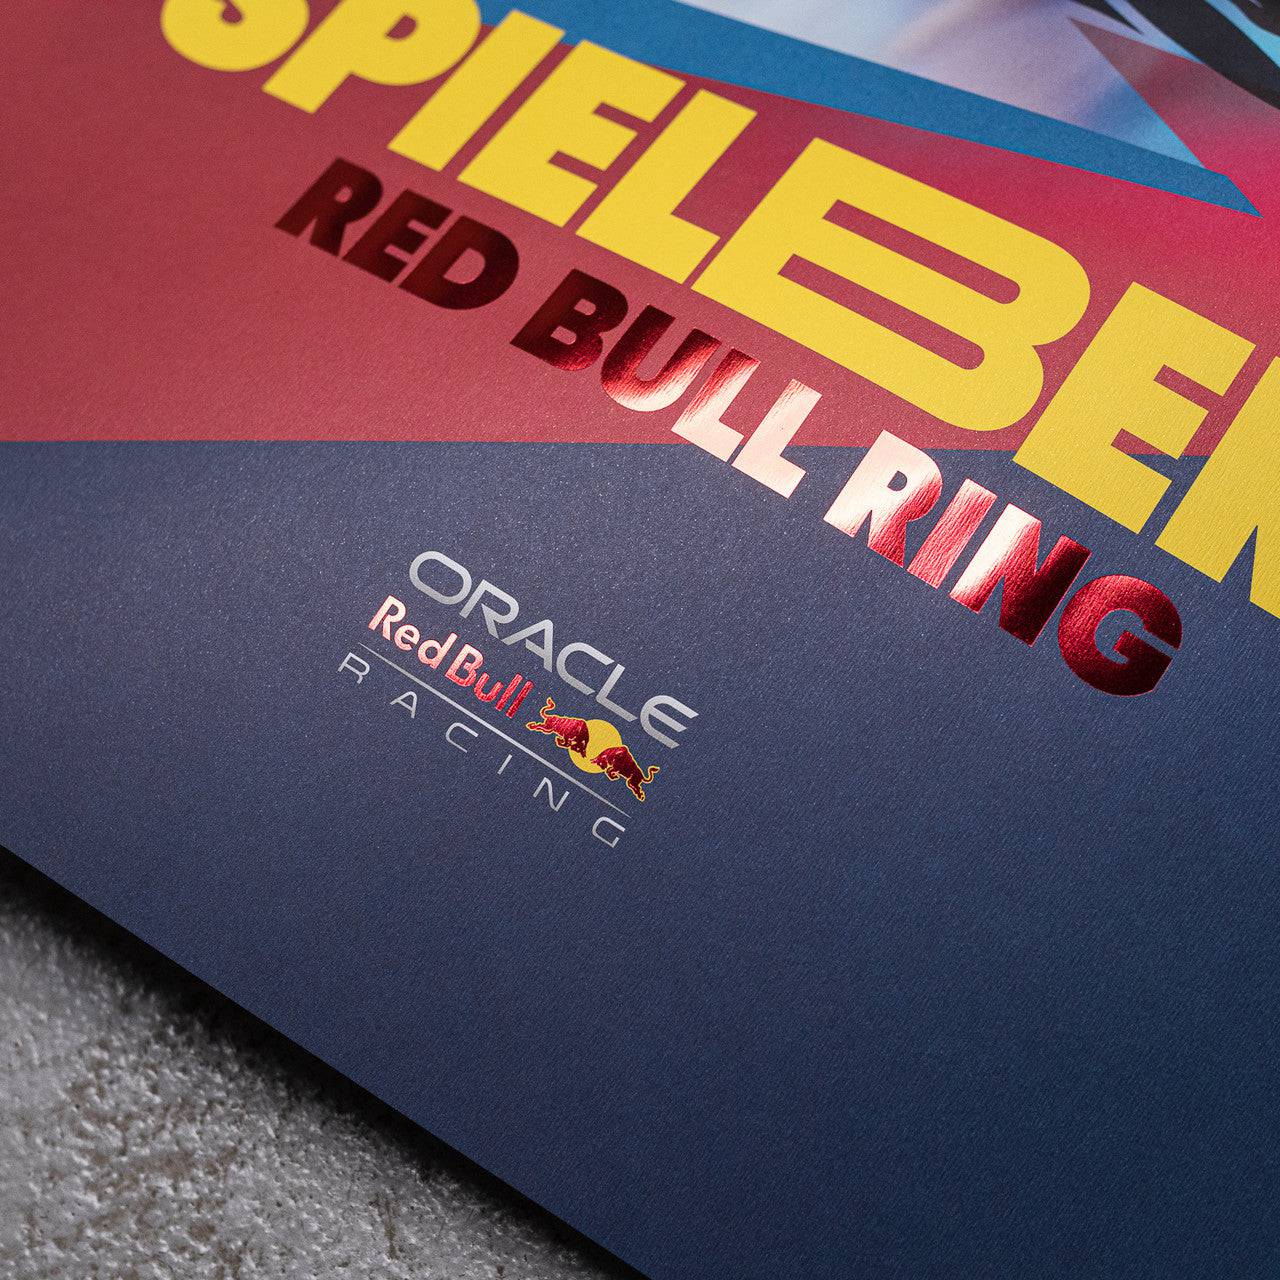 Oracle Red Bull Racing - Austrian Grand Prix - 2022 | Collector's Edition